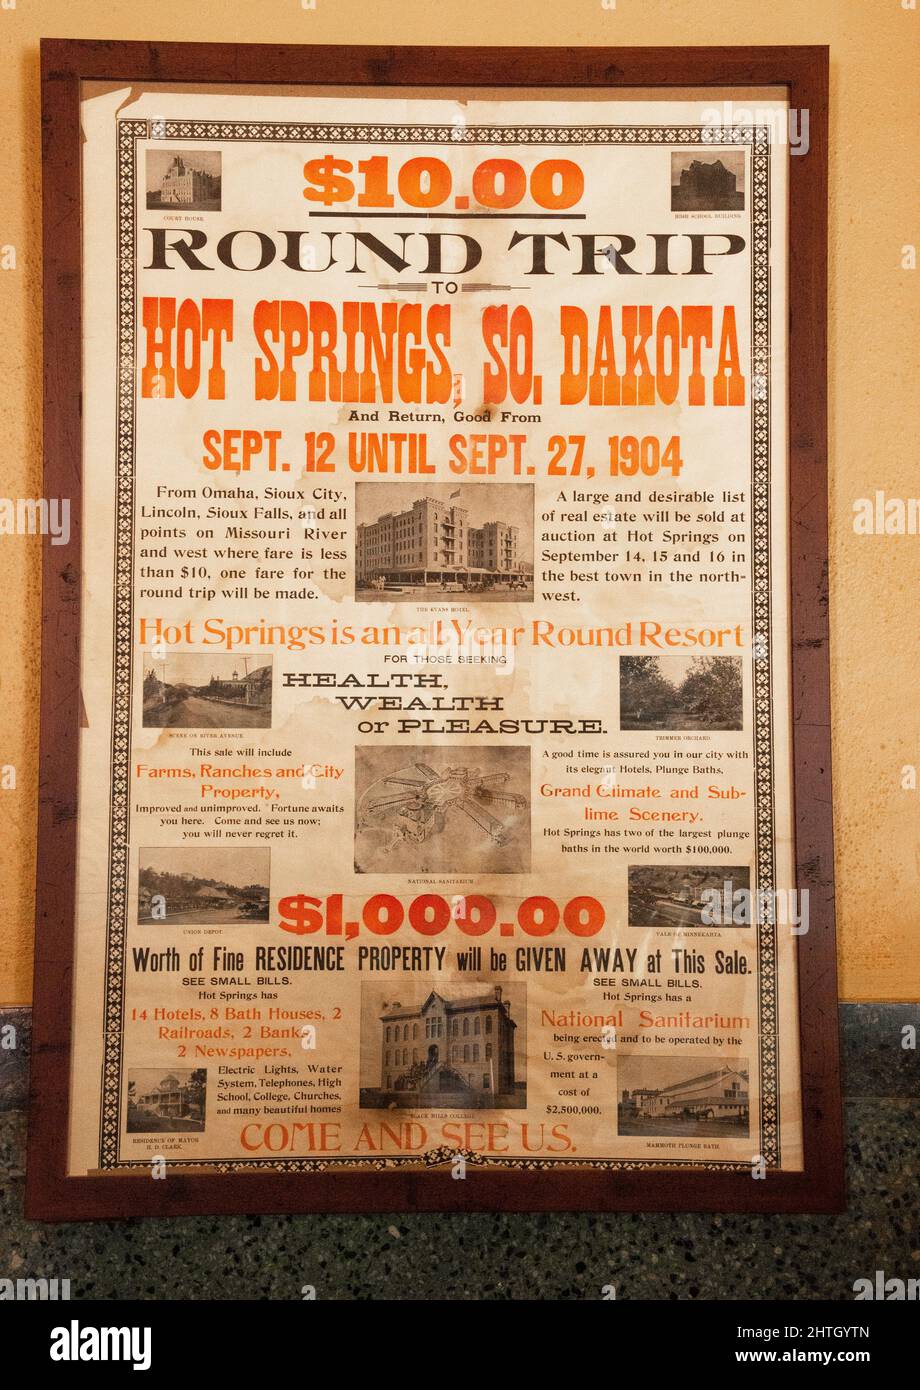 Old poster advertisement about coming to Hot Springs, South Dakota by train for ten dollars roundtrip and real estate up for sale Stock Photo